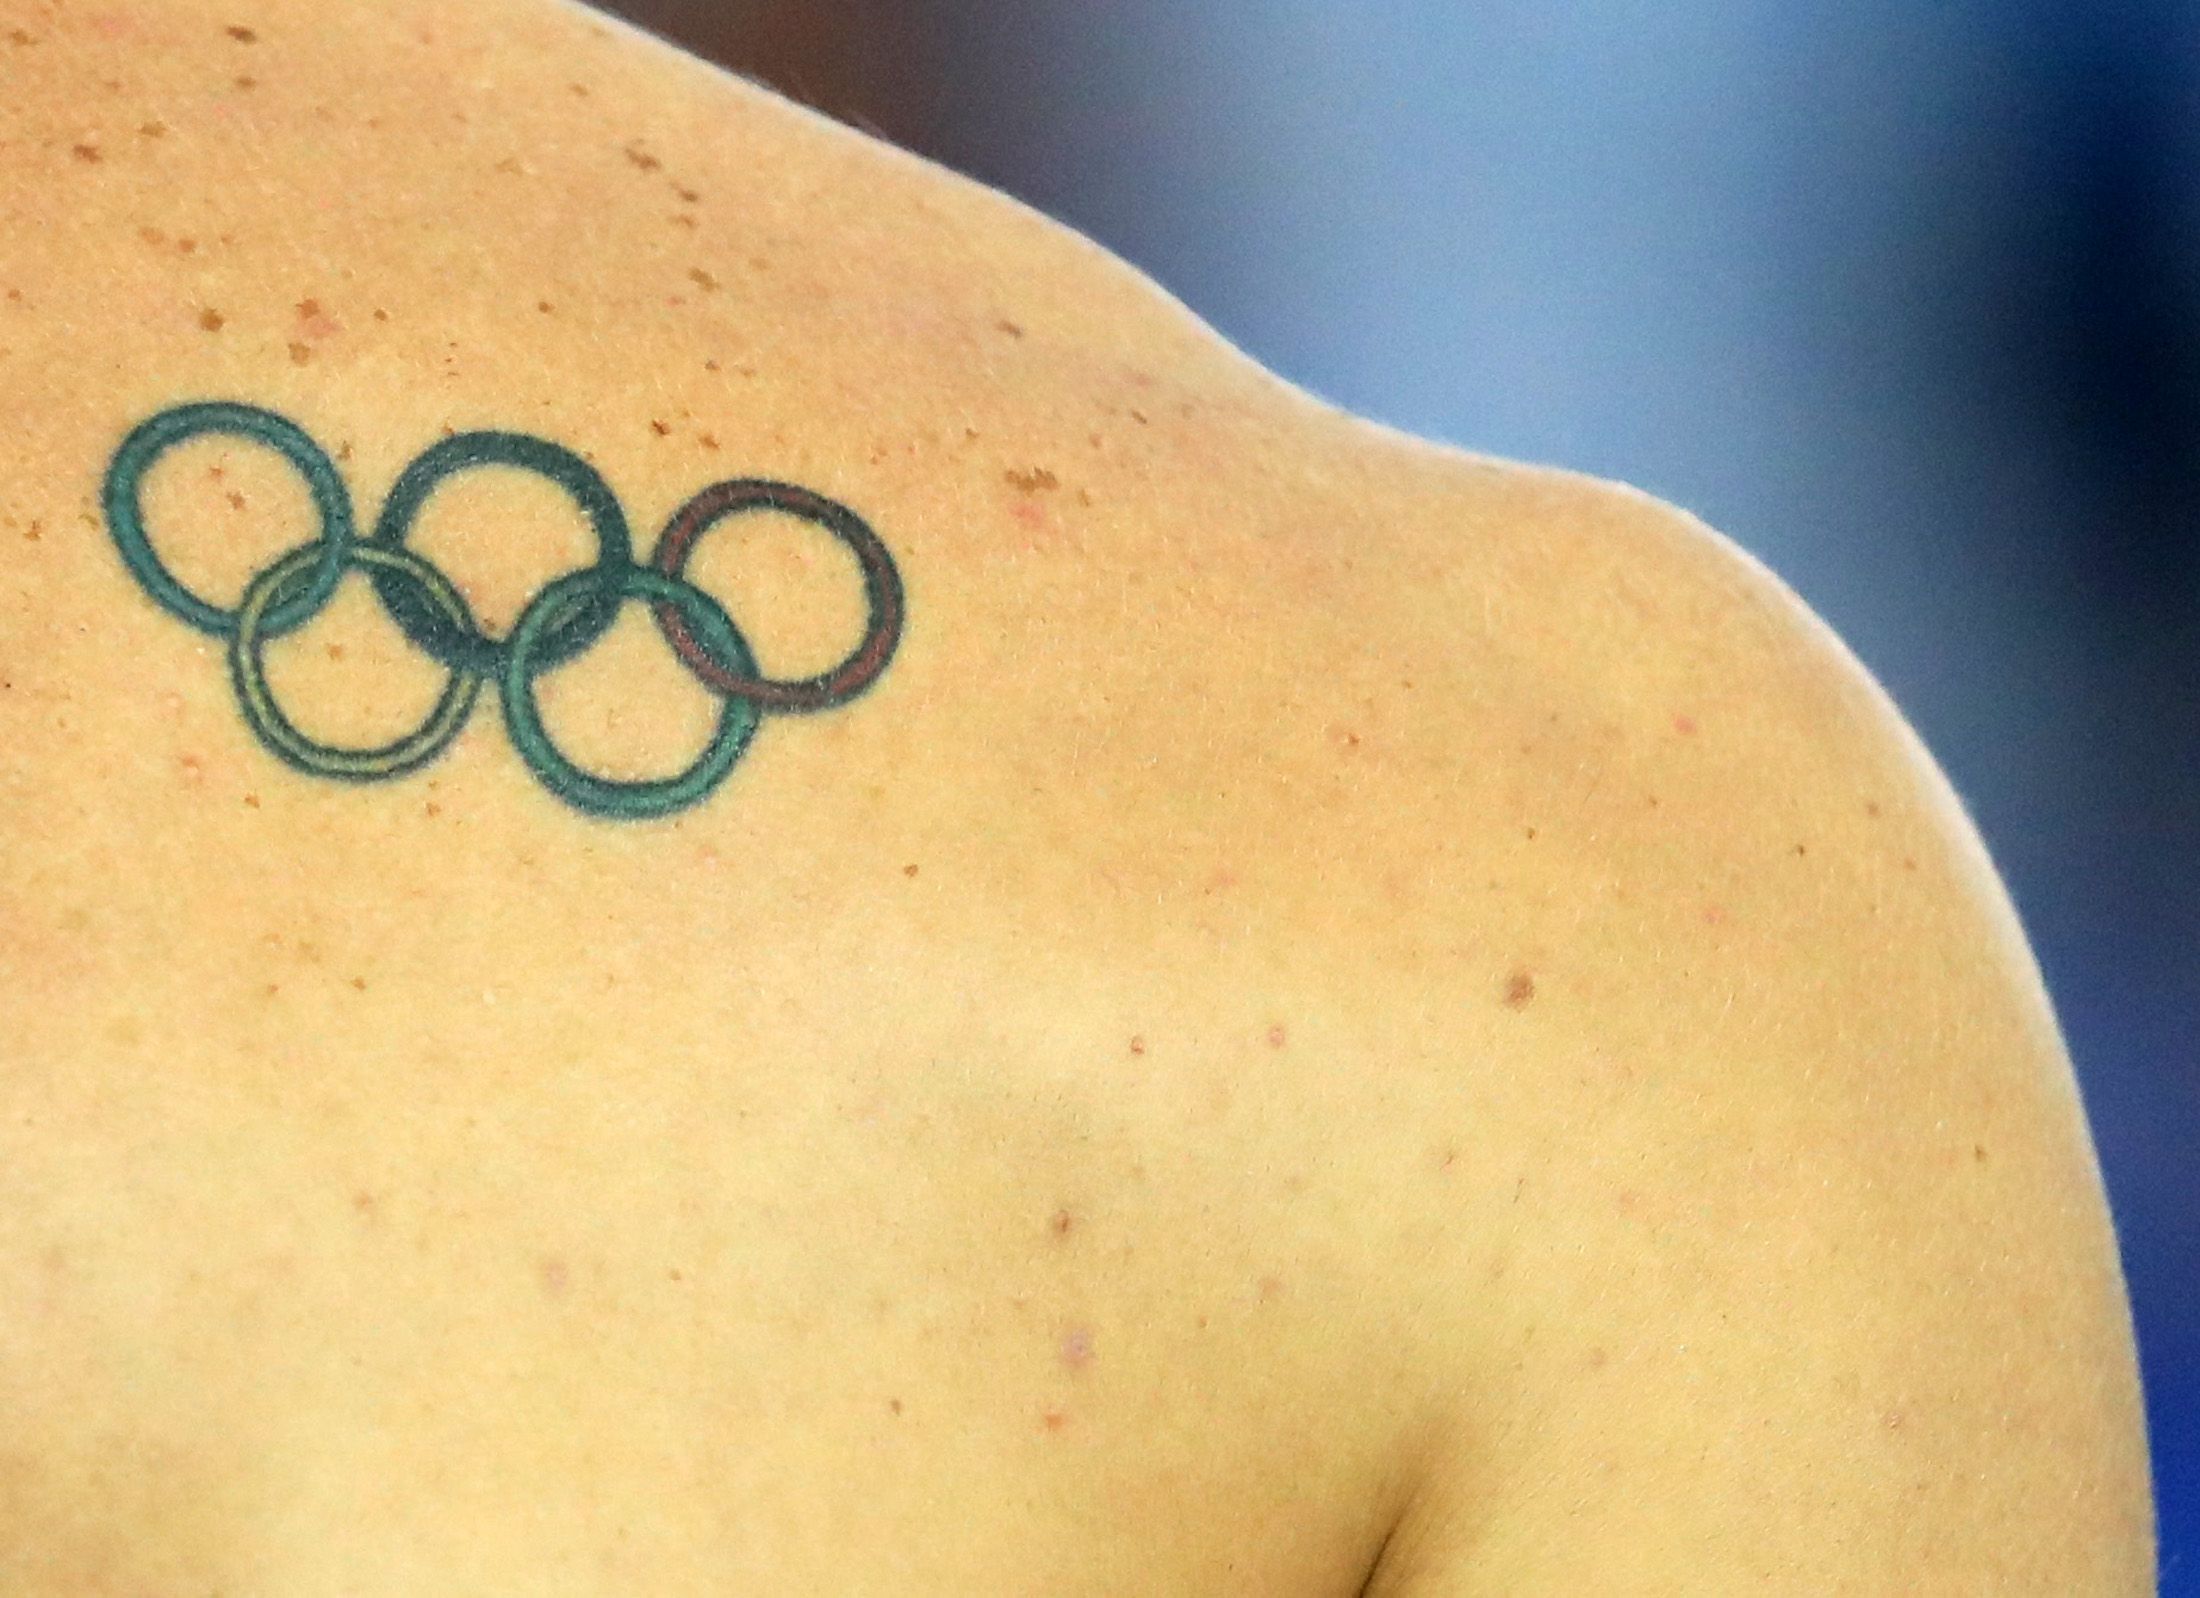 Tom Daley sports Olympic rings tattoo on Twitter after London 2012 success  | Metro News